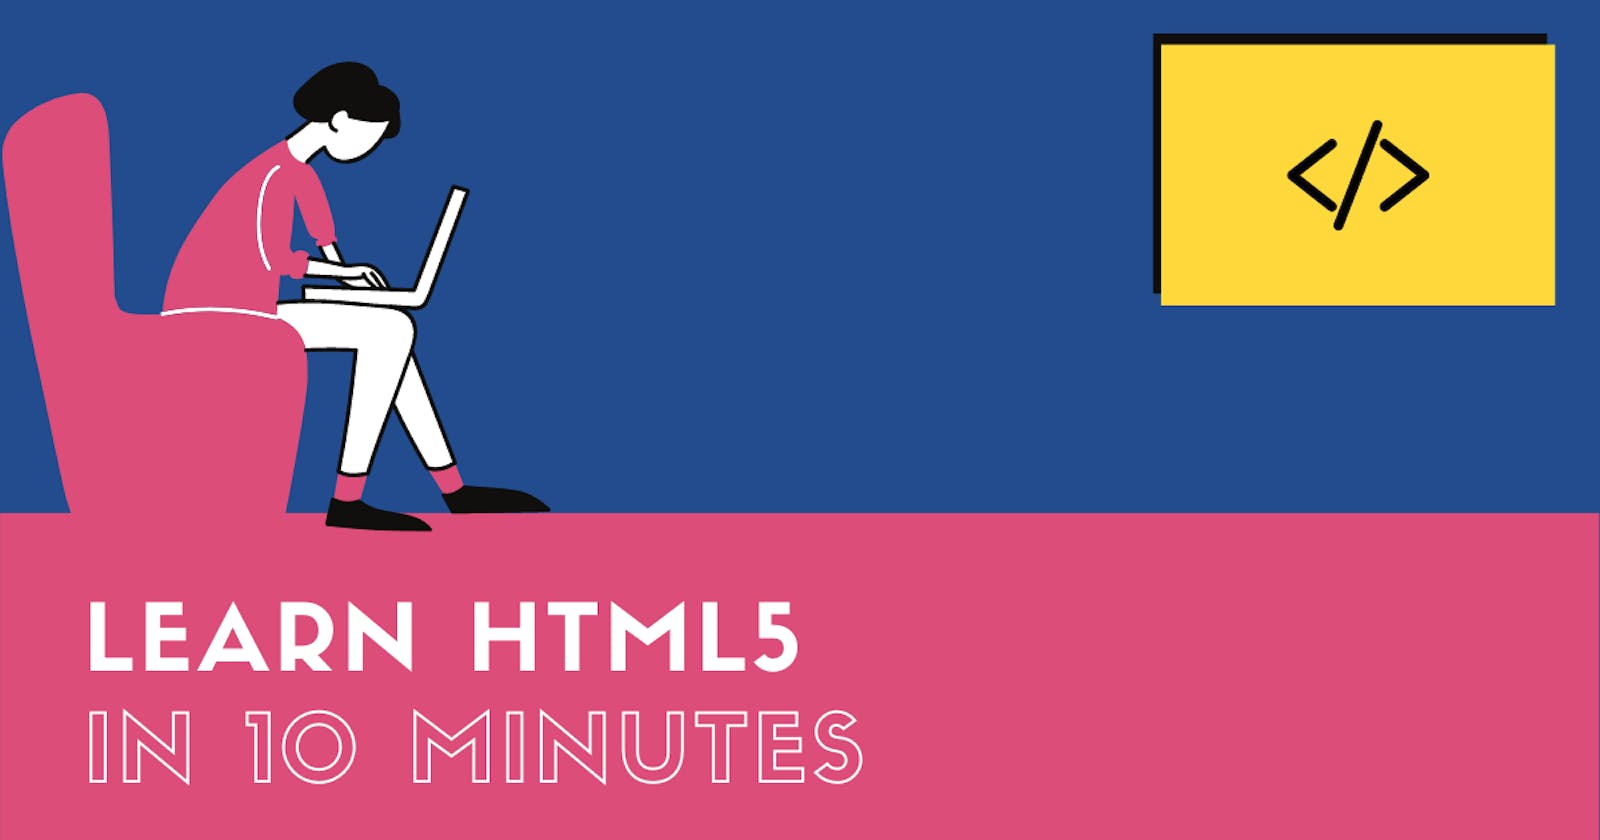 Learn HTML5 in 10 minutes.